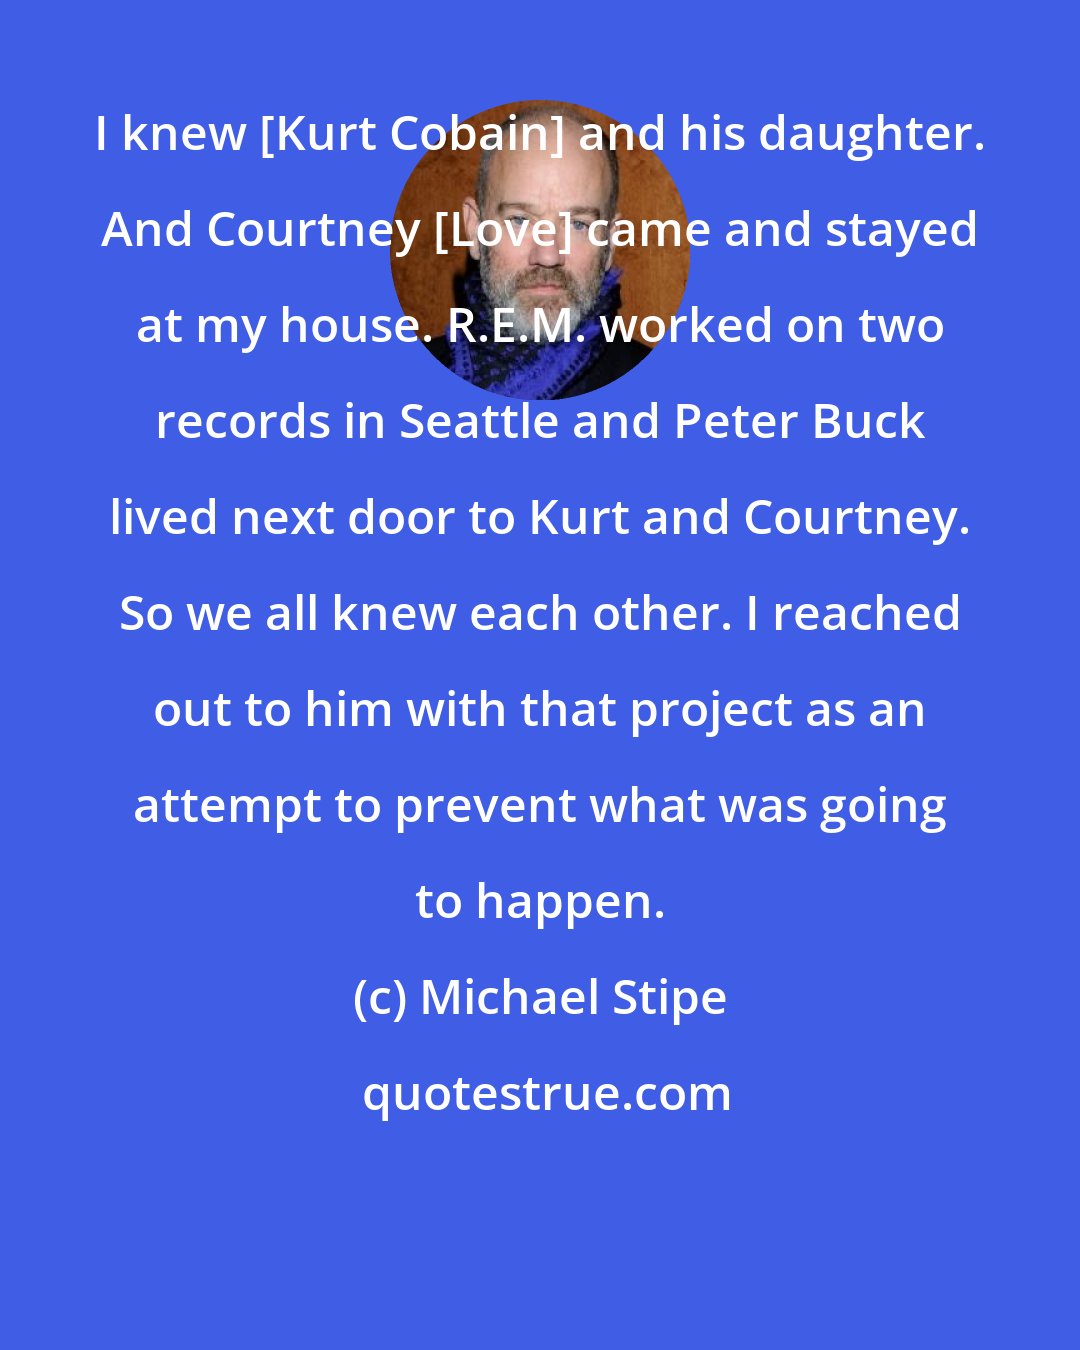 Michael Stipe: I knew [Kurt Cobain] and his daughter. And Courtney [Love] came and stayed at my house. R.E.M. worked on two records in Seattle and Peter Buck lived next door to Kurt and Courtney. So we all knew each other. I reached out to him with that project as an attempt to prevent what was going to happen.